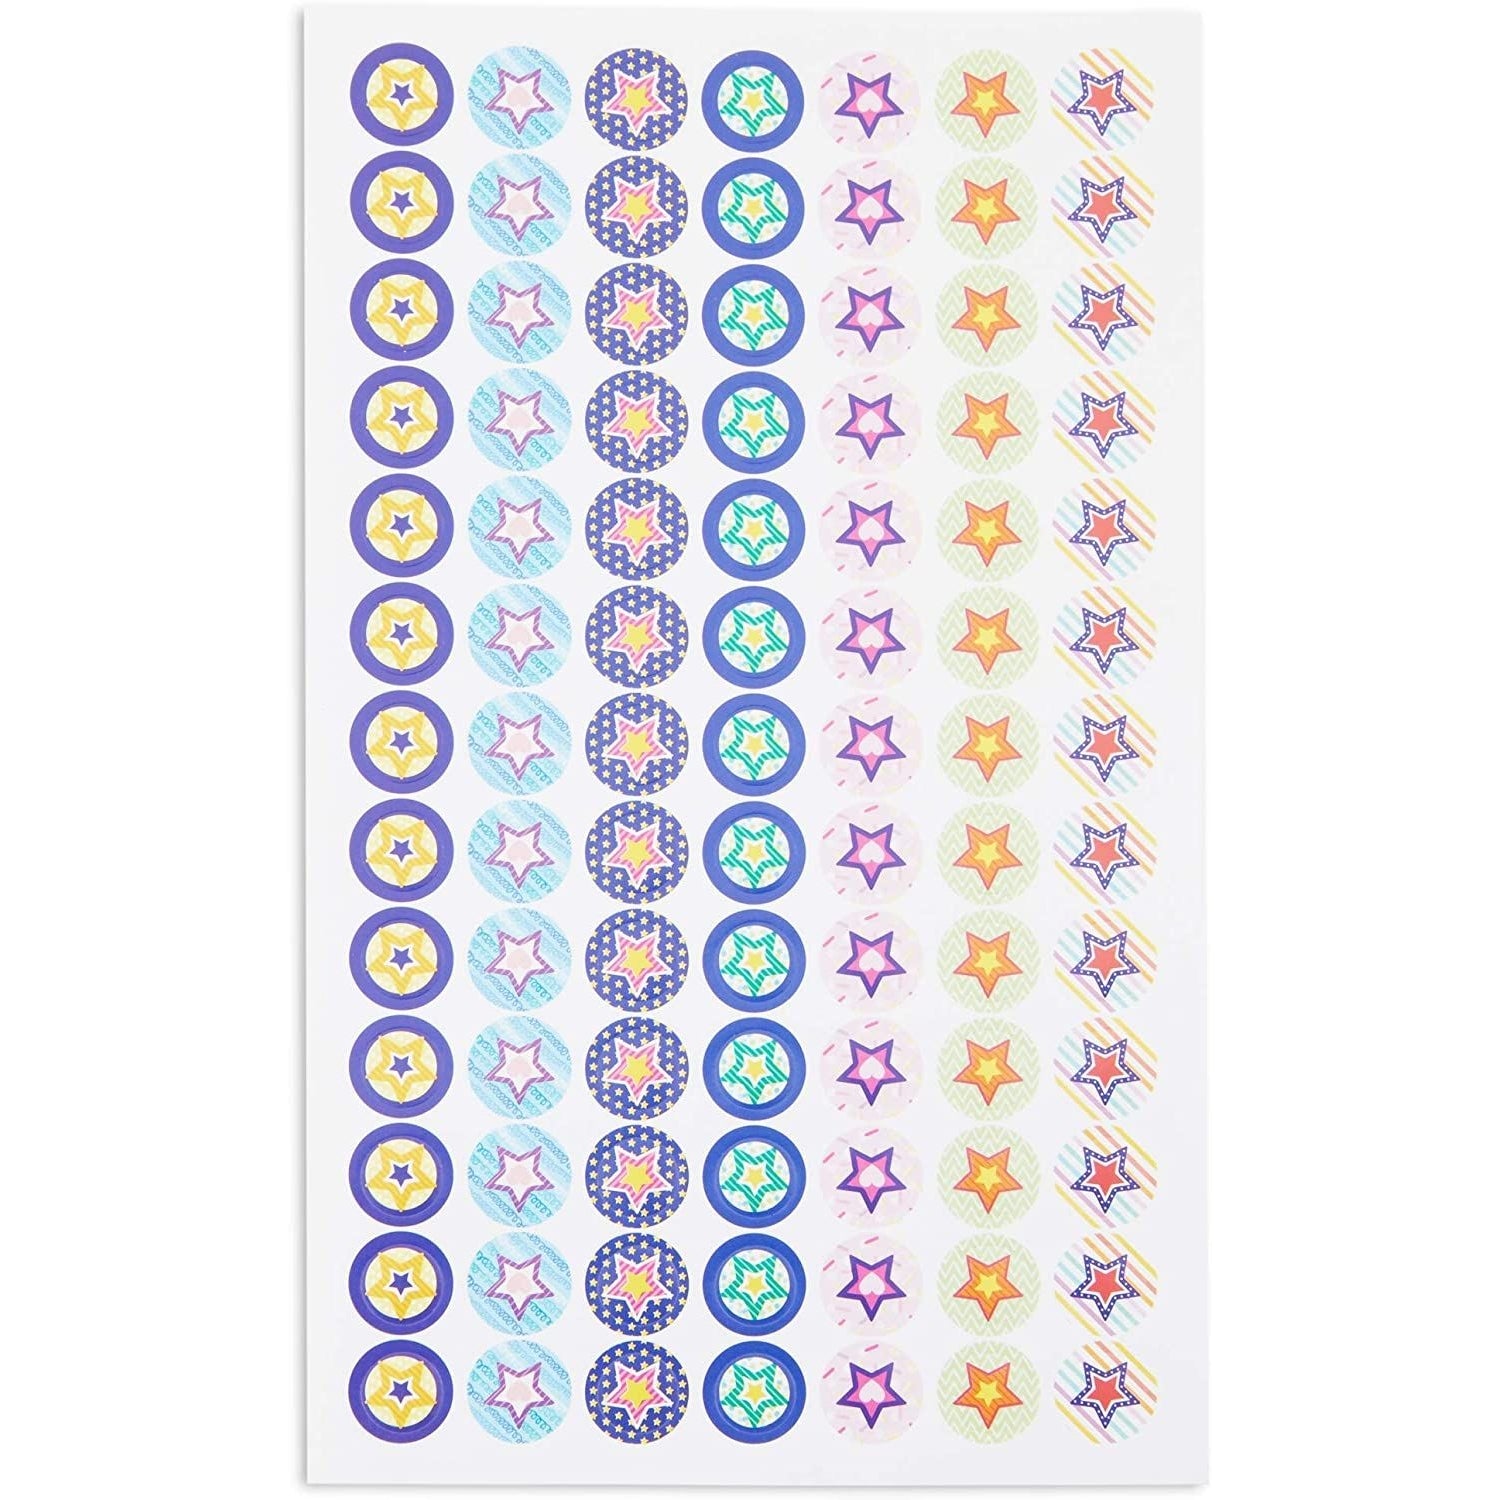 2730 Count Teacher Star Reward Stickers for Kids and Students, Small  Sticker for Behavior Chart, Classroom Supplies, 30 Sheets, Assorted Designs